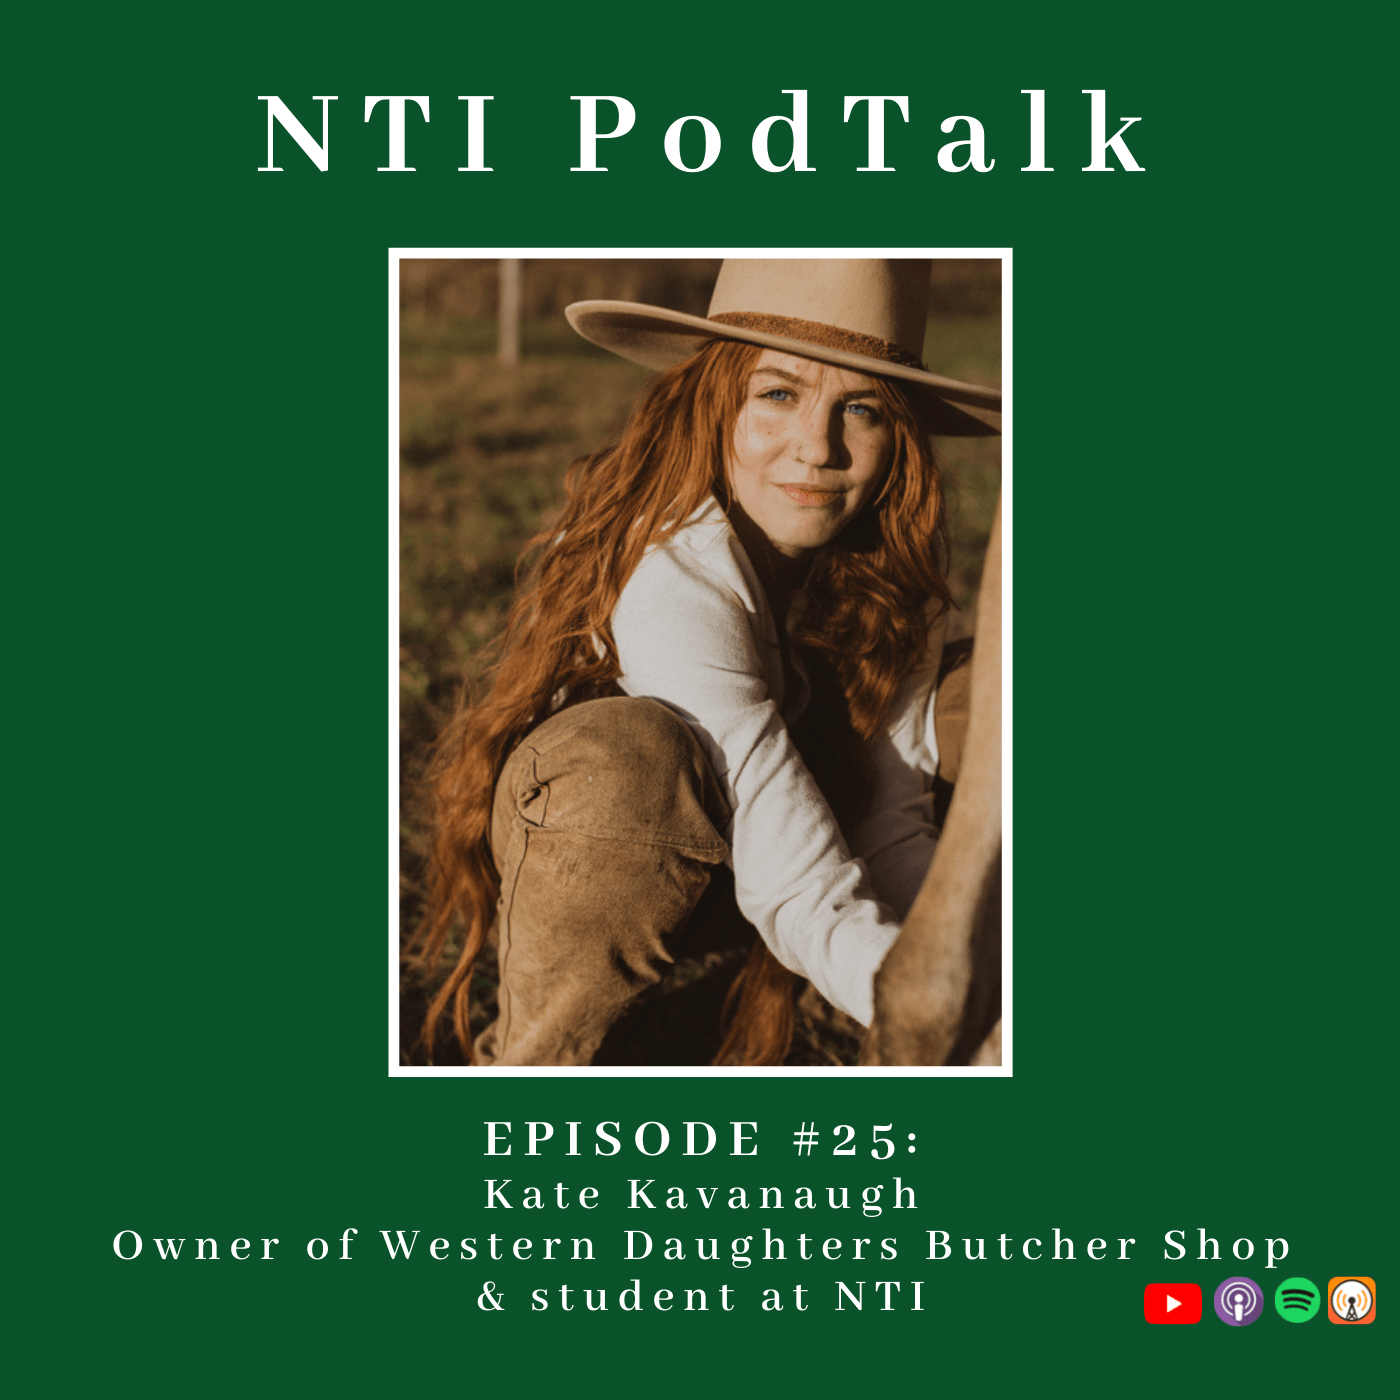 Featured image for “NTI PodTalk with Kate Kavanaugh, Owner of Western Daughters Butcher Shop and NTI Student”